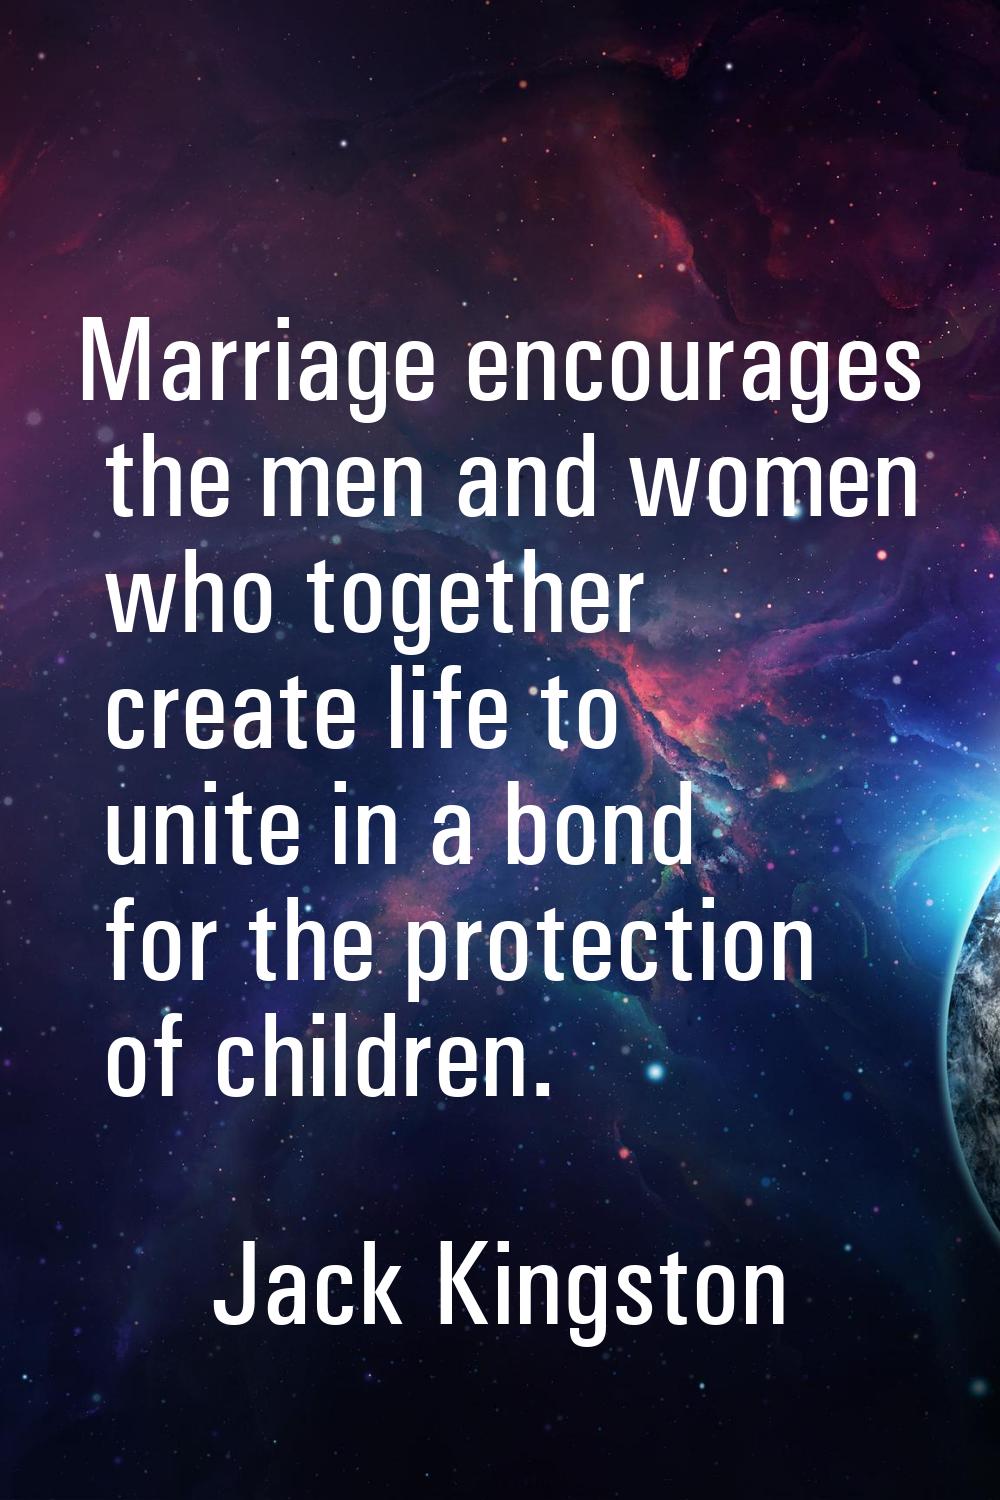 Marriage encourages the men and women who together create life to unite in a bond for the protectio